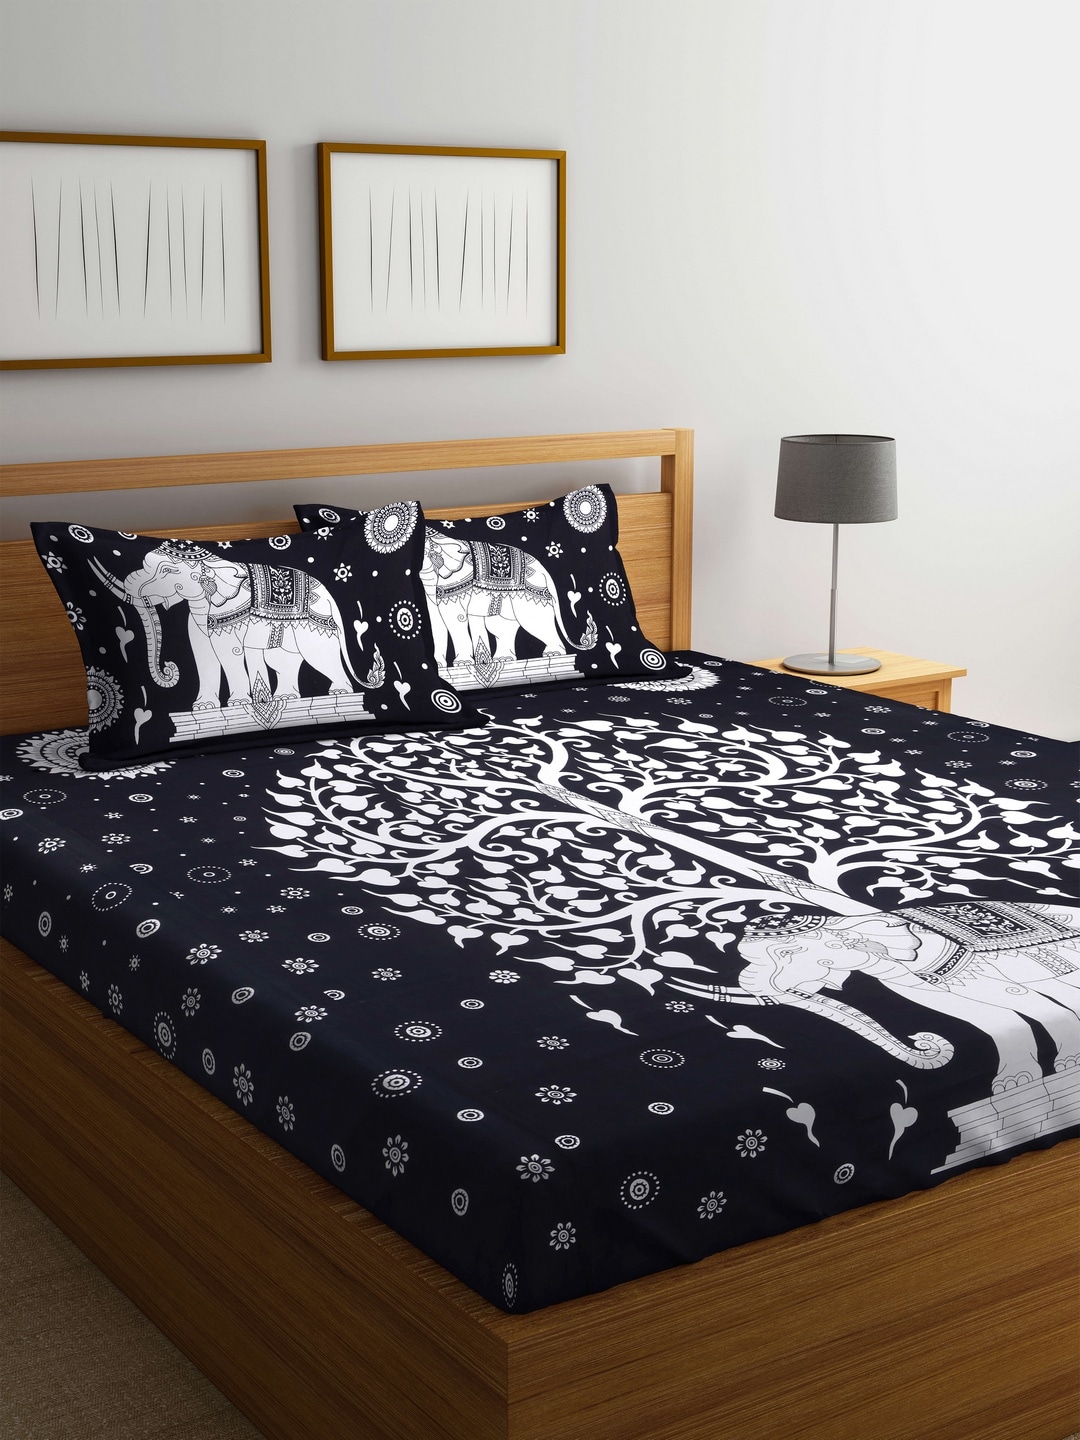 Rajasthan Decor Black & White Abstract Flat 144 TC Cotton 1 King Bedsheet with 2 Pillow Covers Price in India